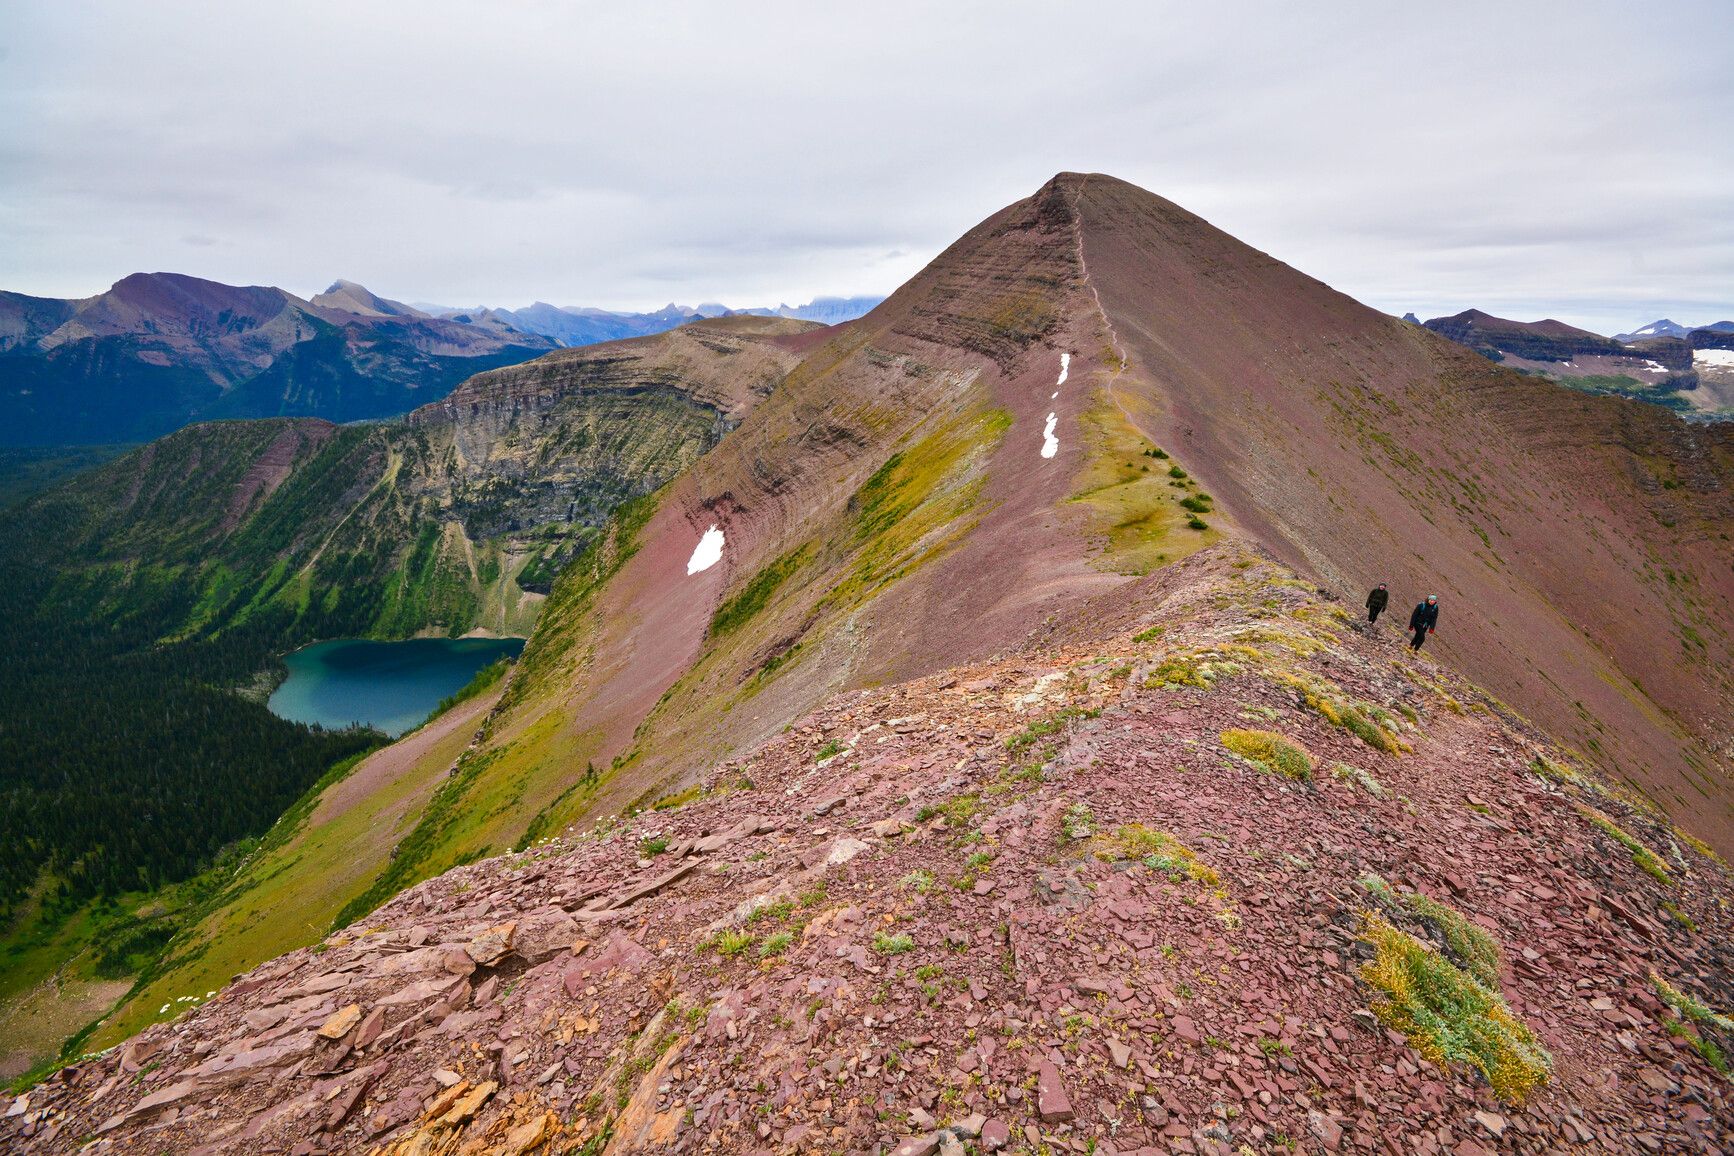 Park visitors hike along Akamina Ridge. Akamina-Kishinena Provincial Park is part of the Crown of the Continent, which is the narrowest point of the Rocky Mountains.